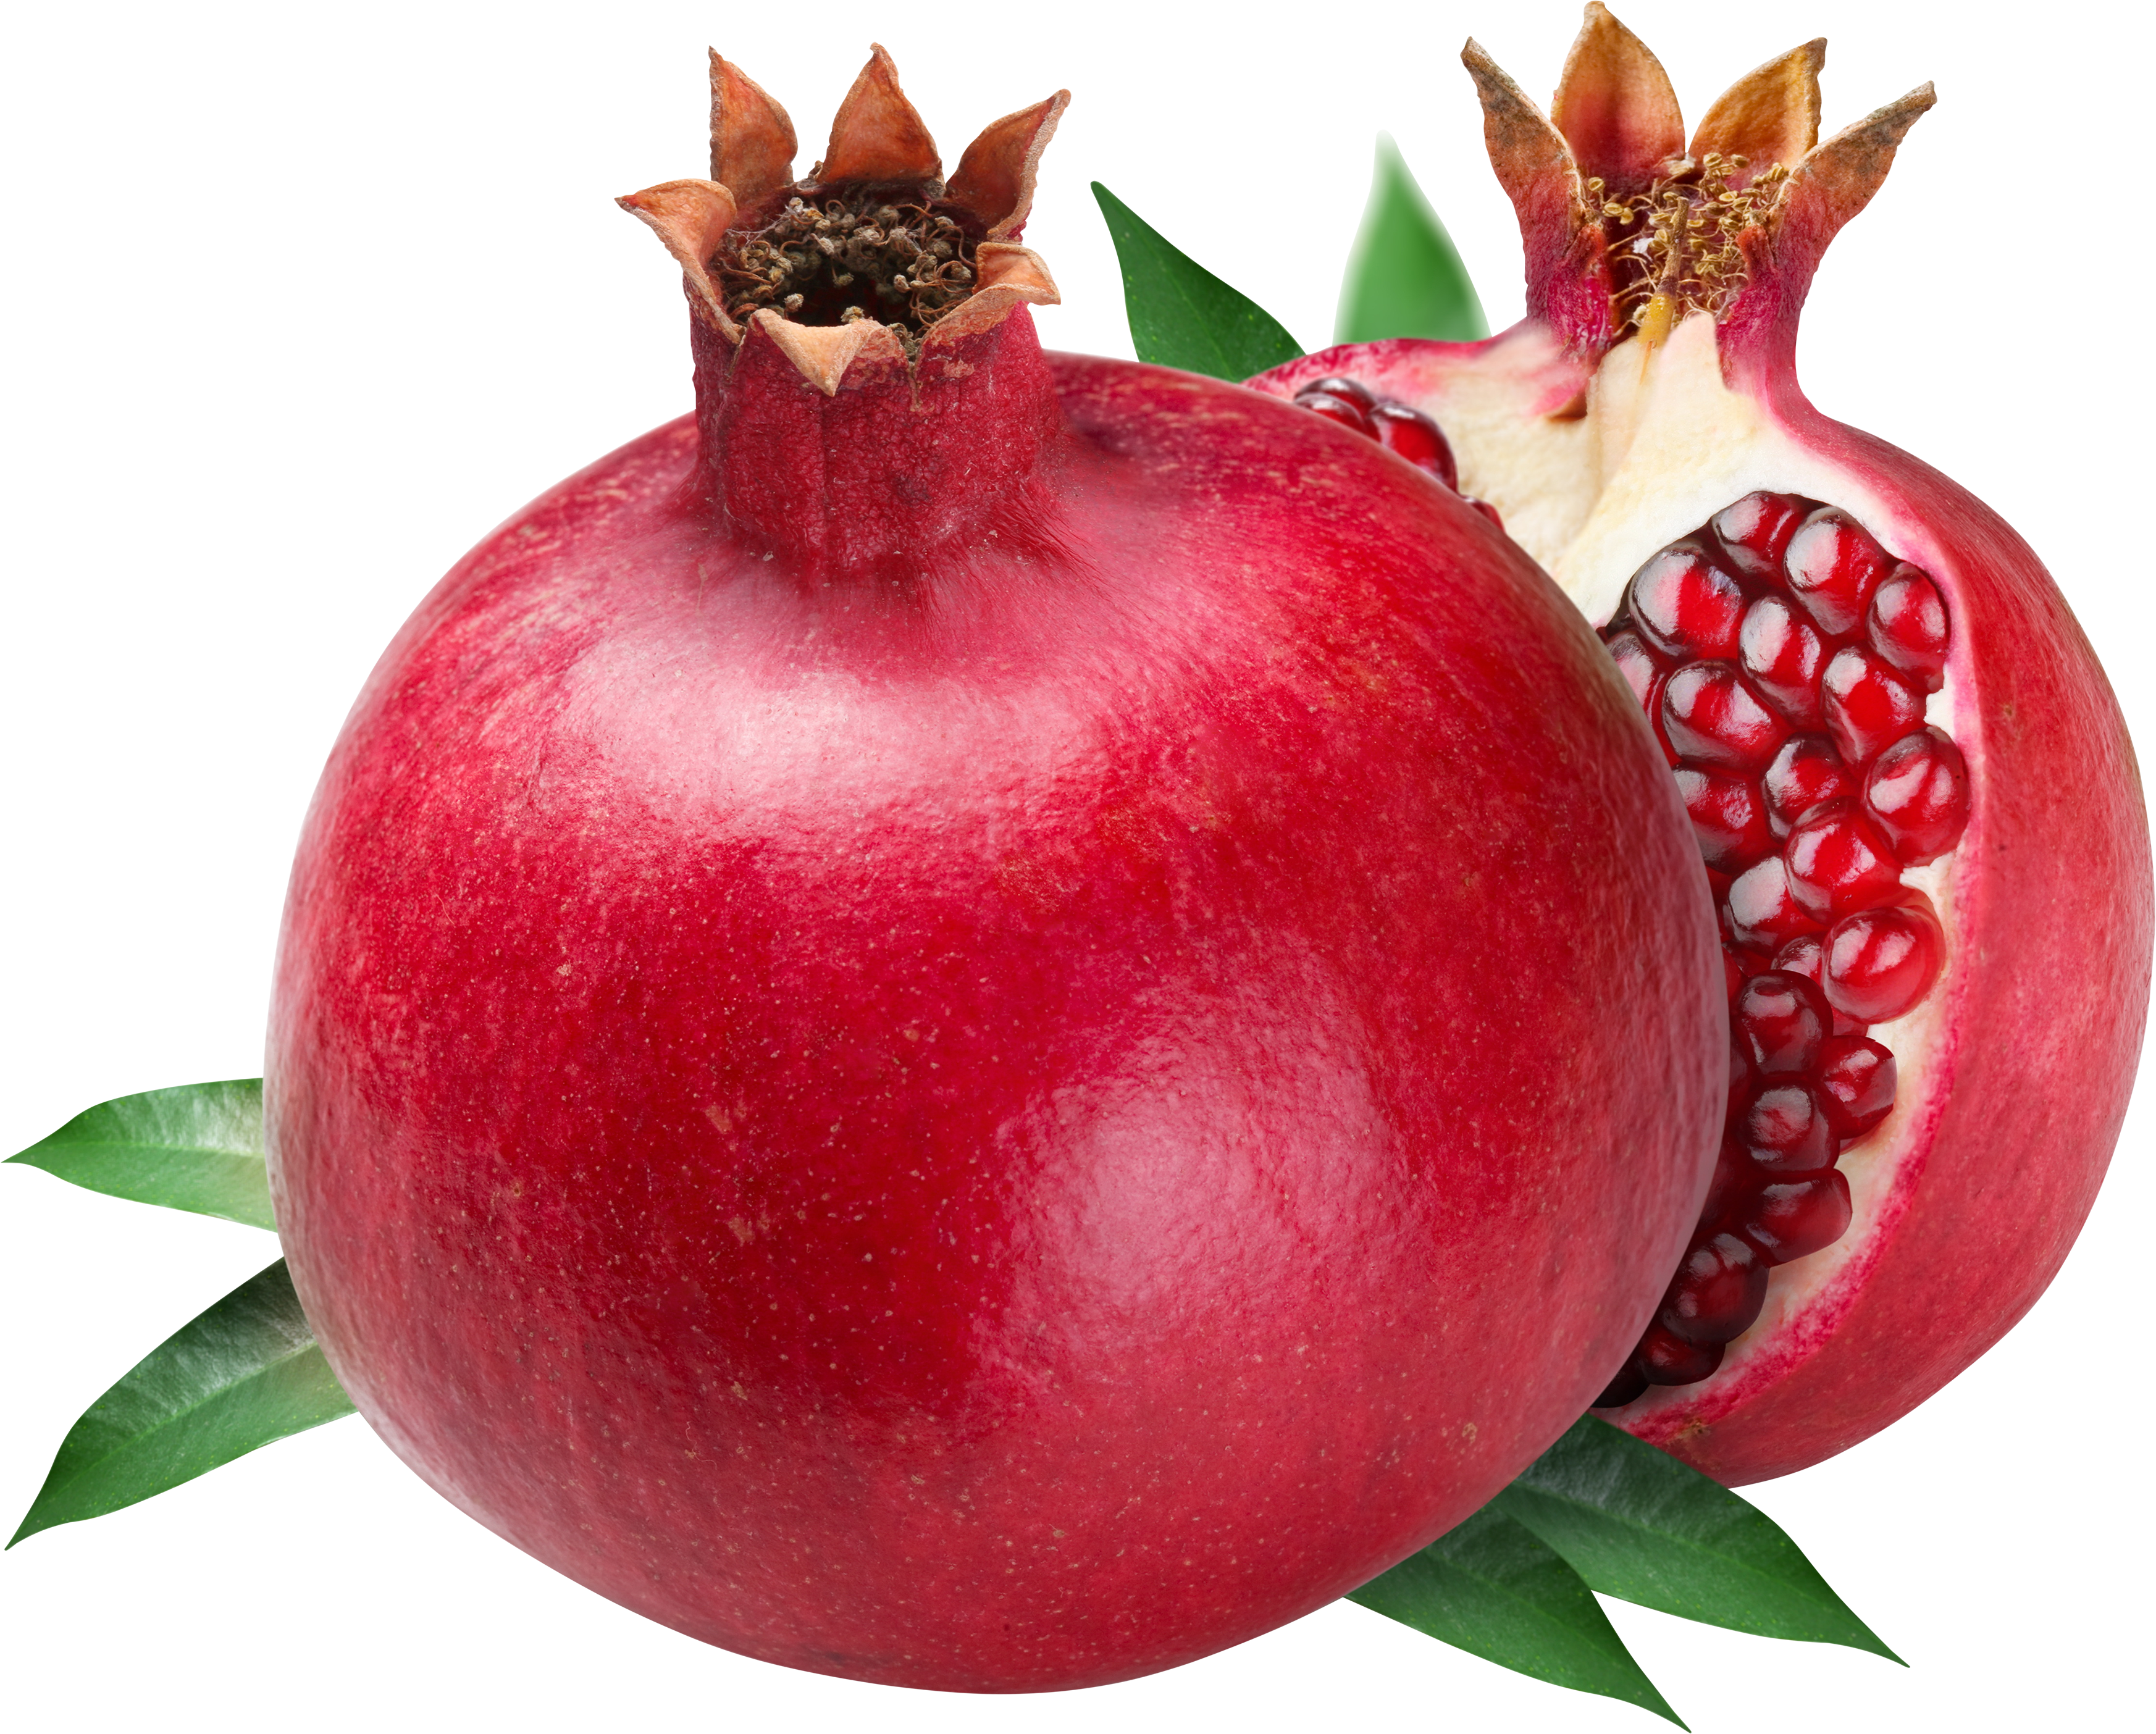 HQ Pomegranate Wallpapers | File 10802.11Kb